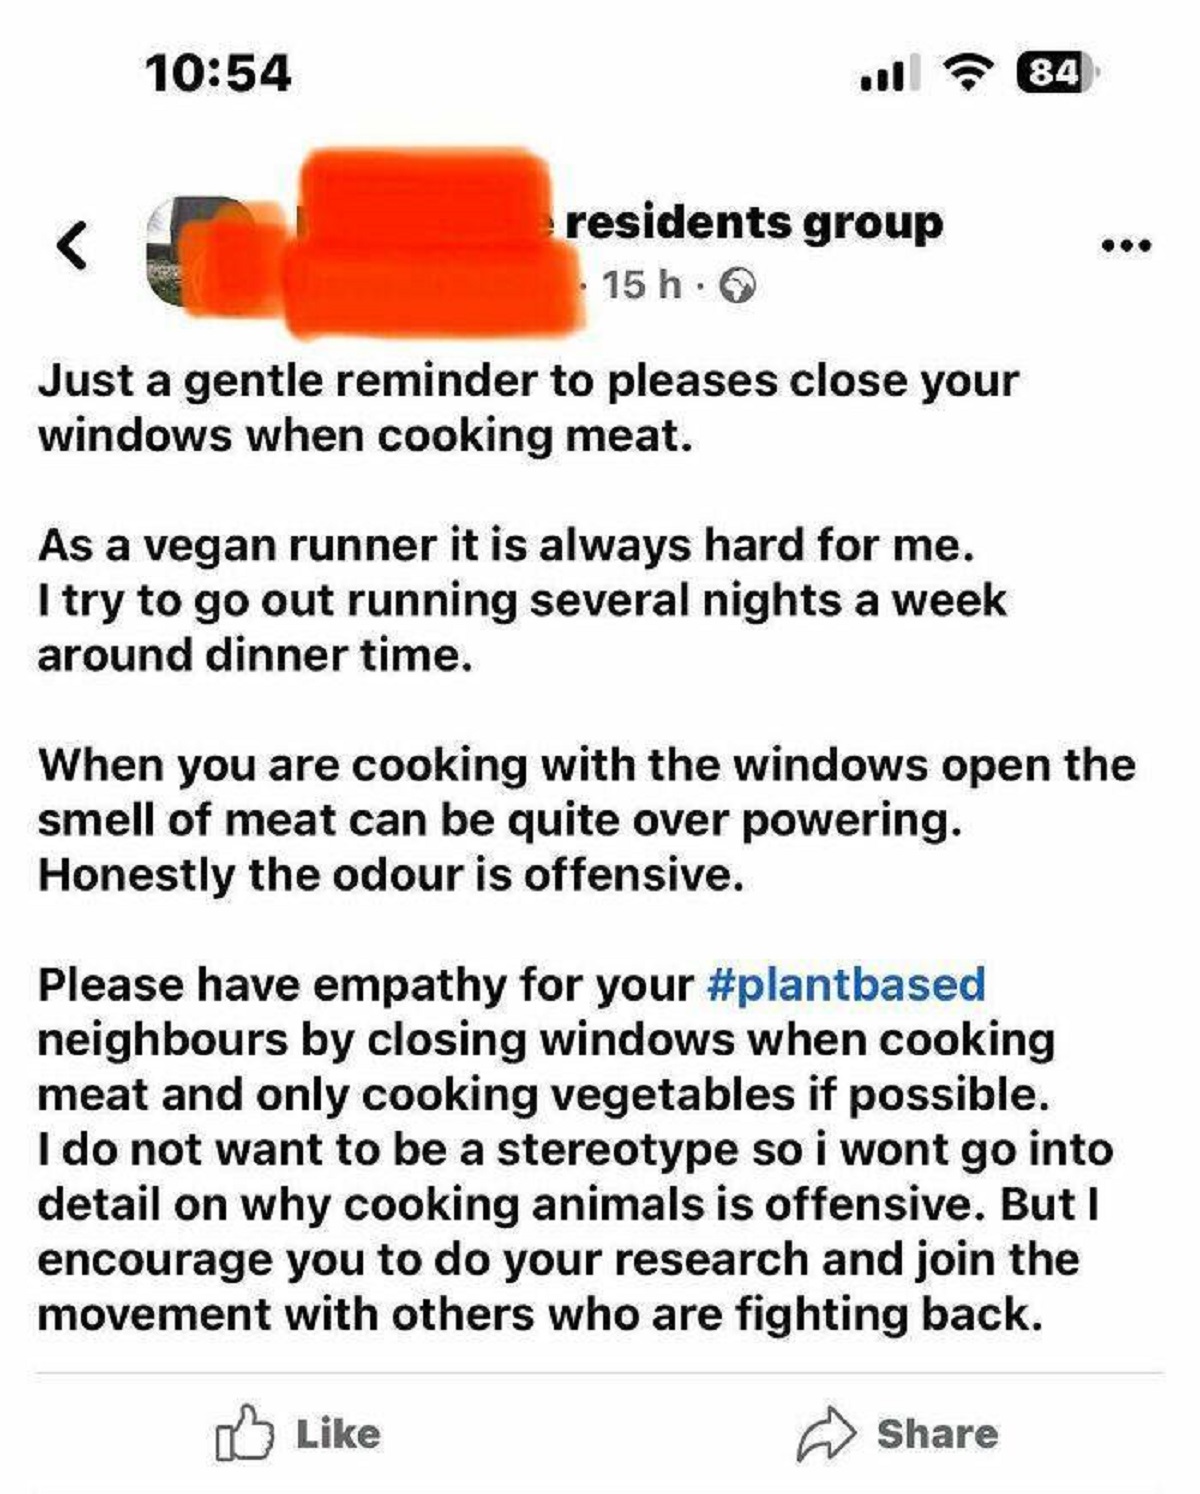 document - l 84 residents group 15 h Just a gentle reminder to pleases close your windows when cooking meat. As a vegan runner it is always hard for me. I try to go out running several nights a week around dinner time. When you are cooking with the window